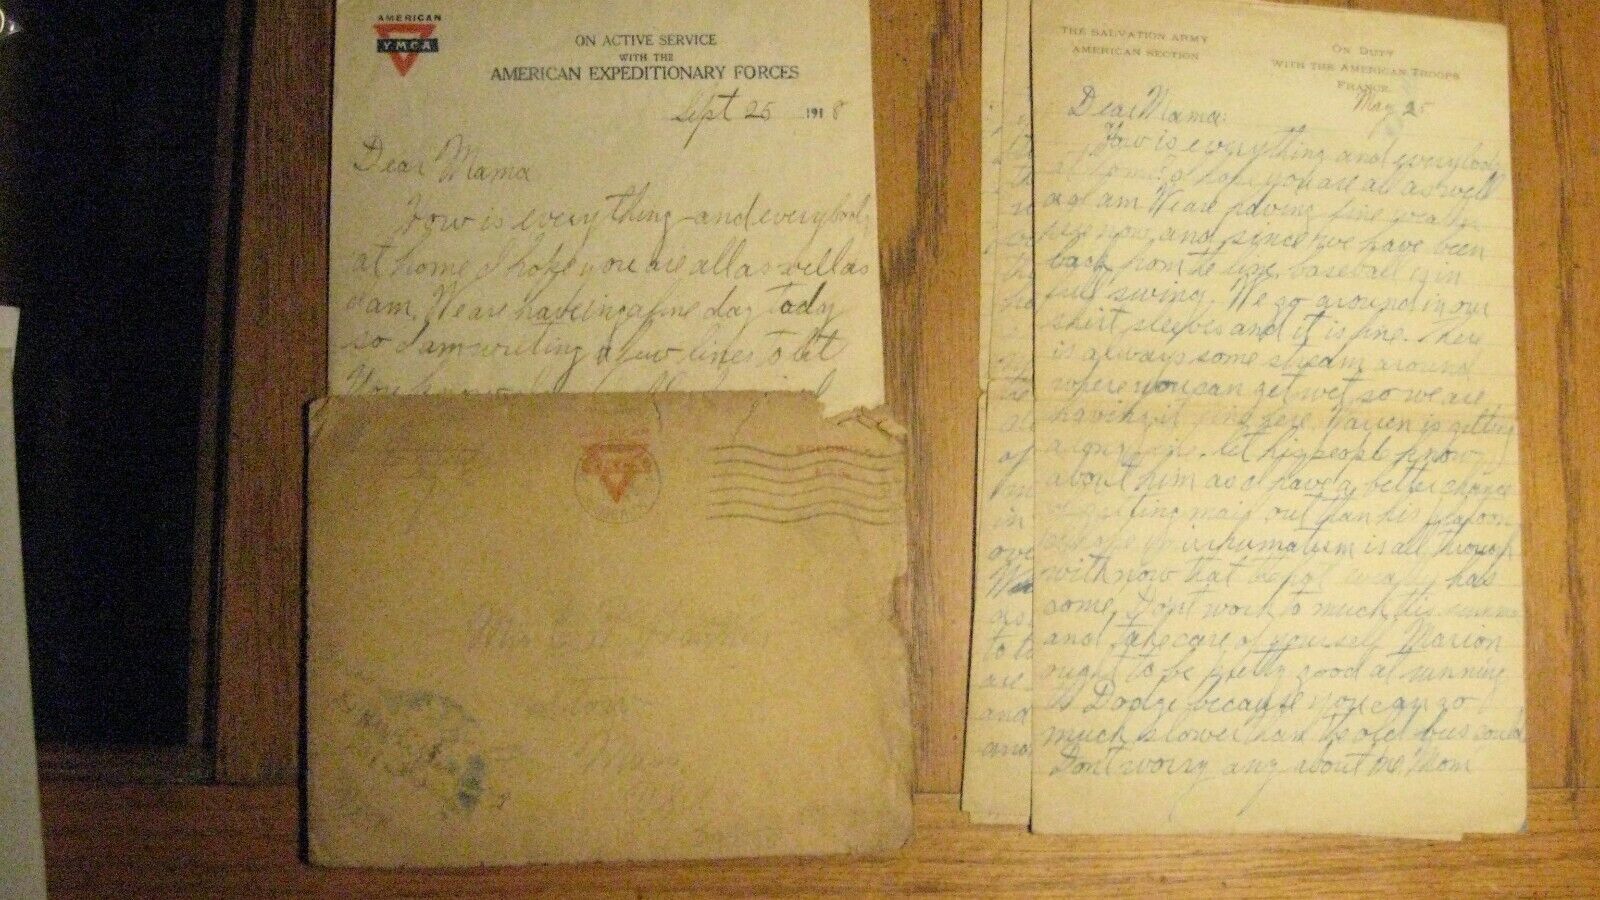 4 WW1 LETTERS AEF SOLDIER IN 101ST INFANTRY 26TH DIVISION DSC